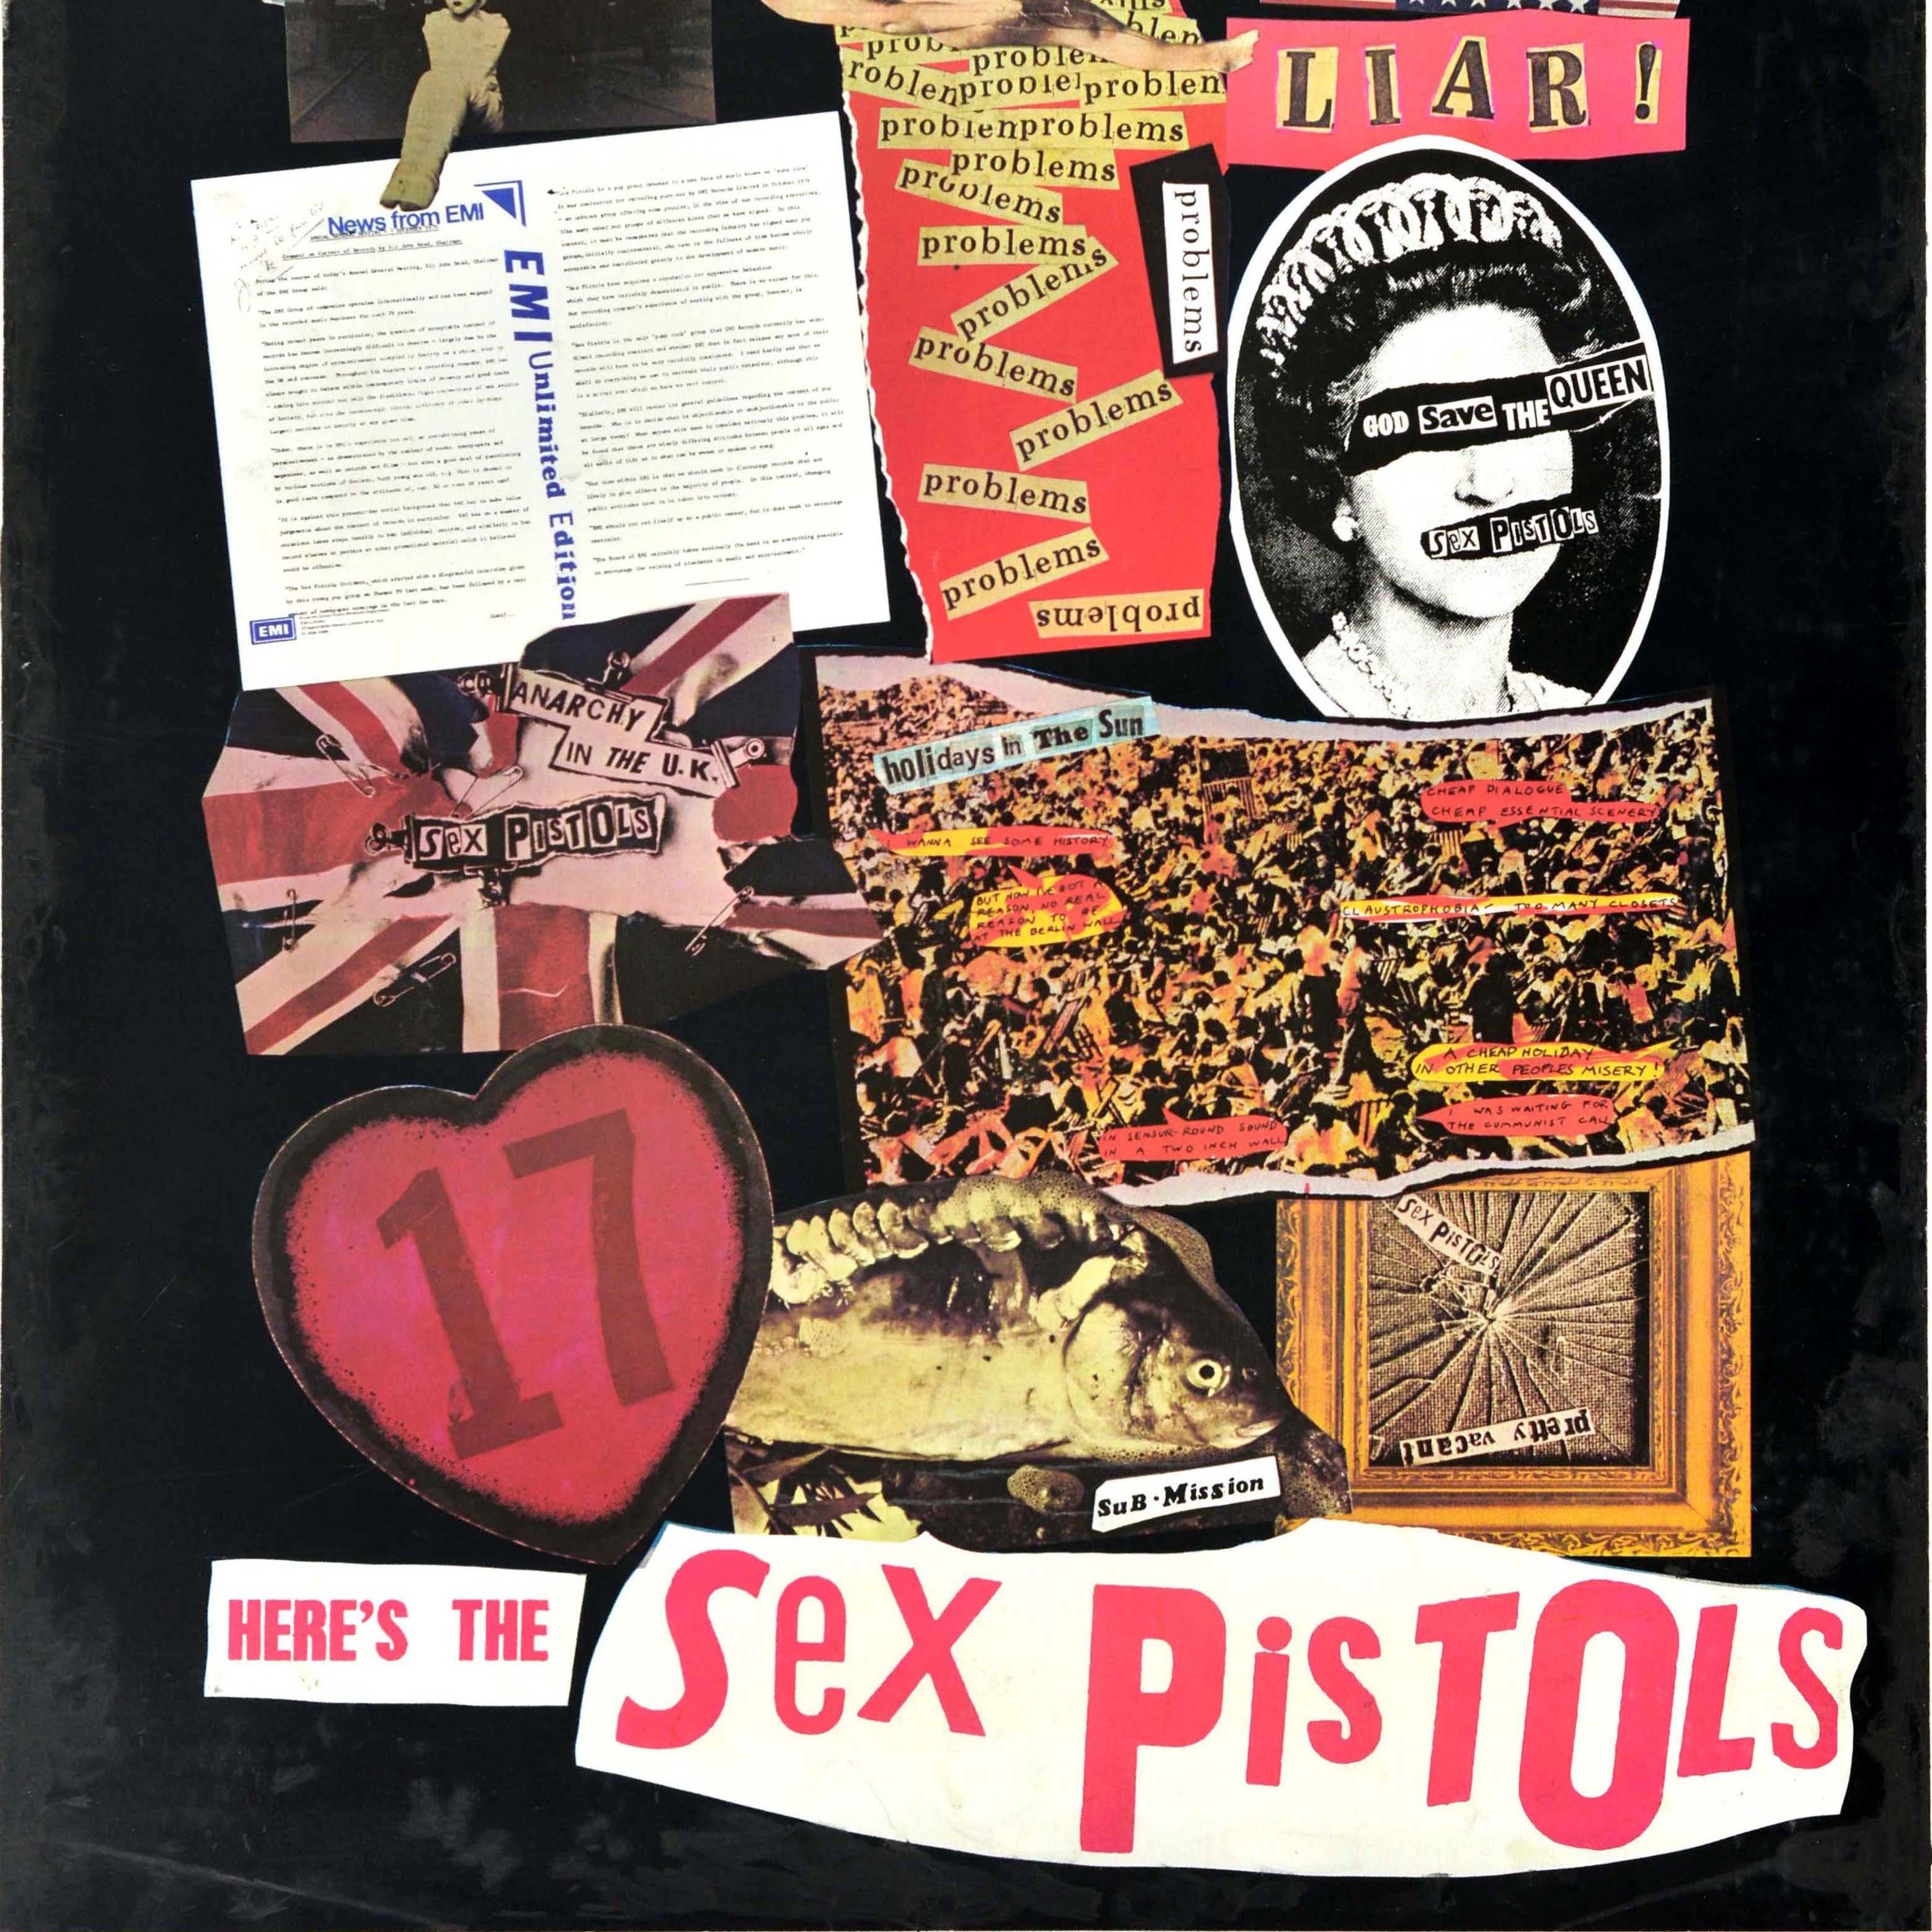 Original vintage music poster for Never Mind the Bollocks Here's the Sex Pistols album release featuring a colourful collage design depicting buildings with No Feelings above, people sunbathing and the word Bodies in the middle, the Statue of